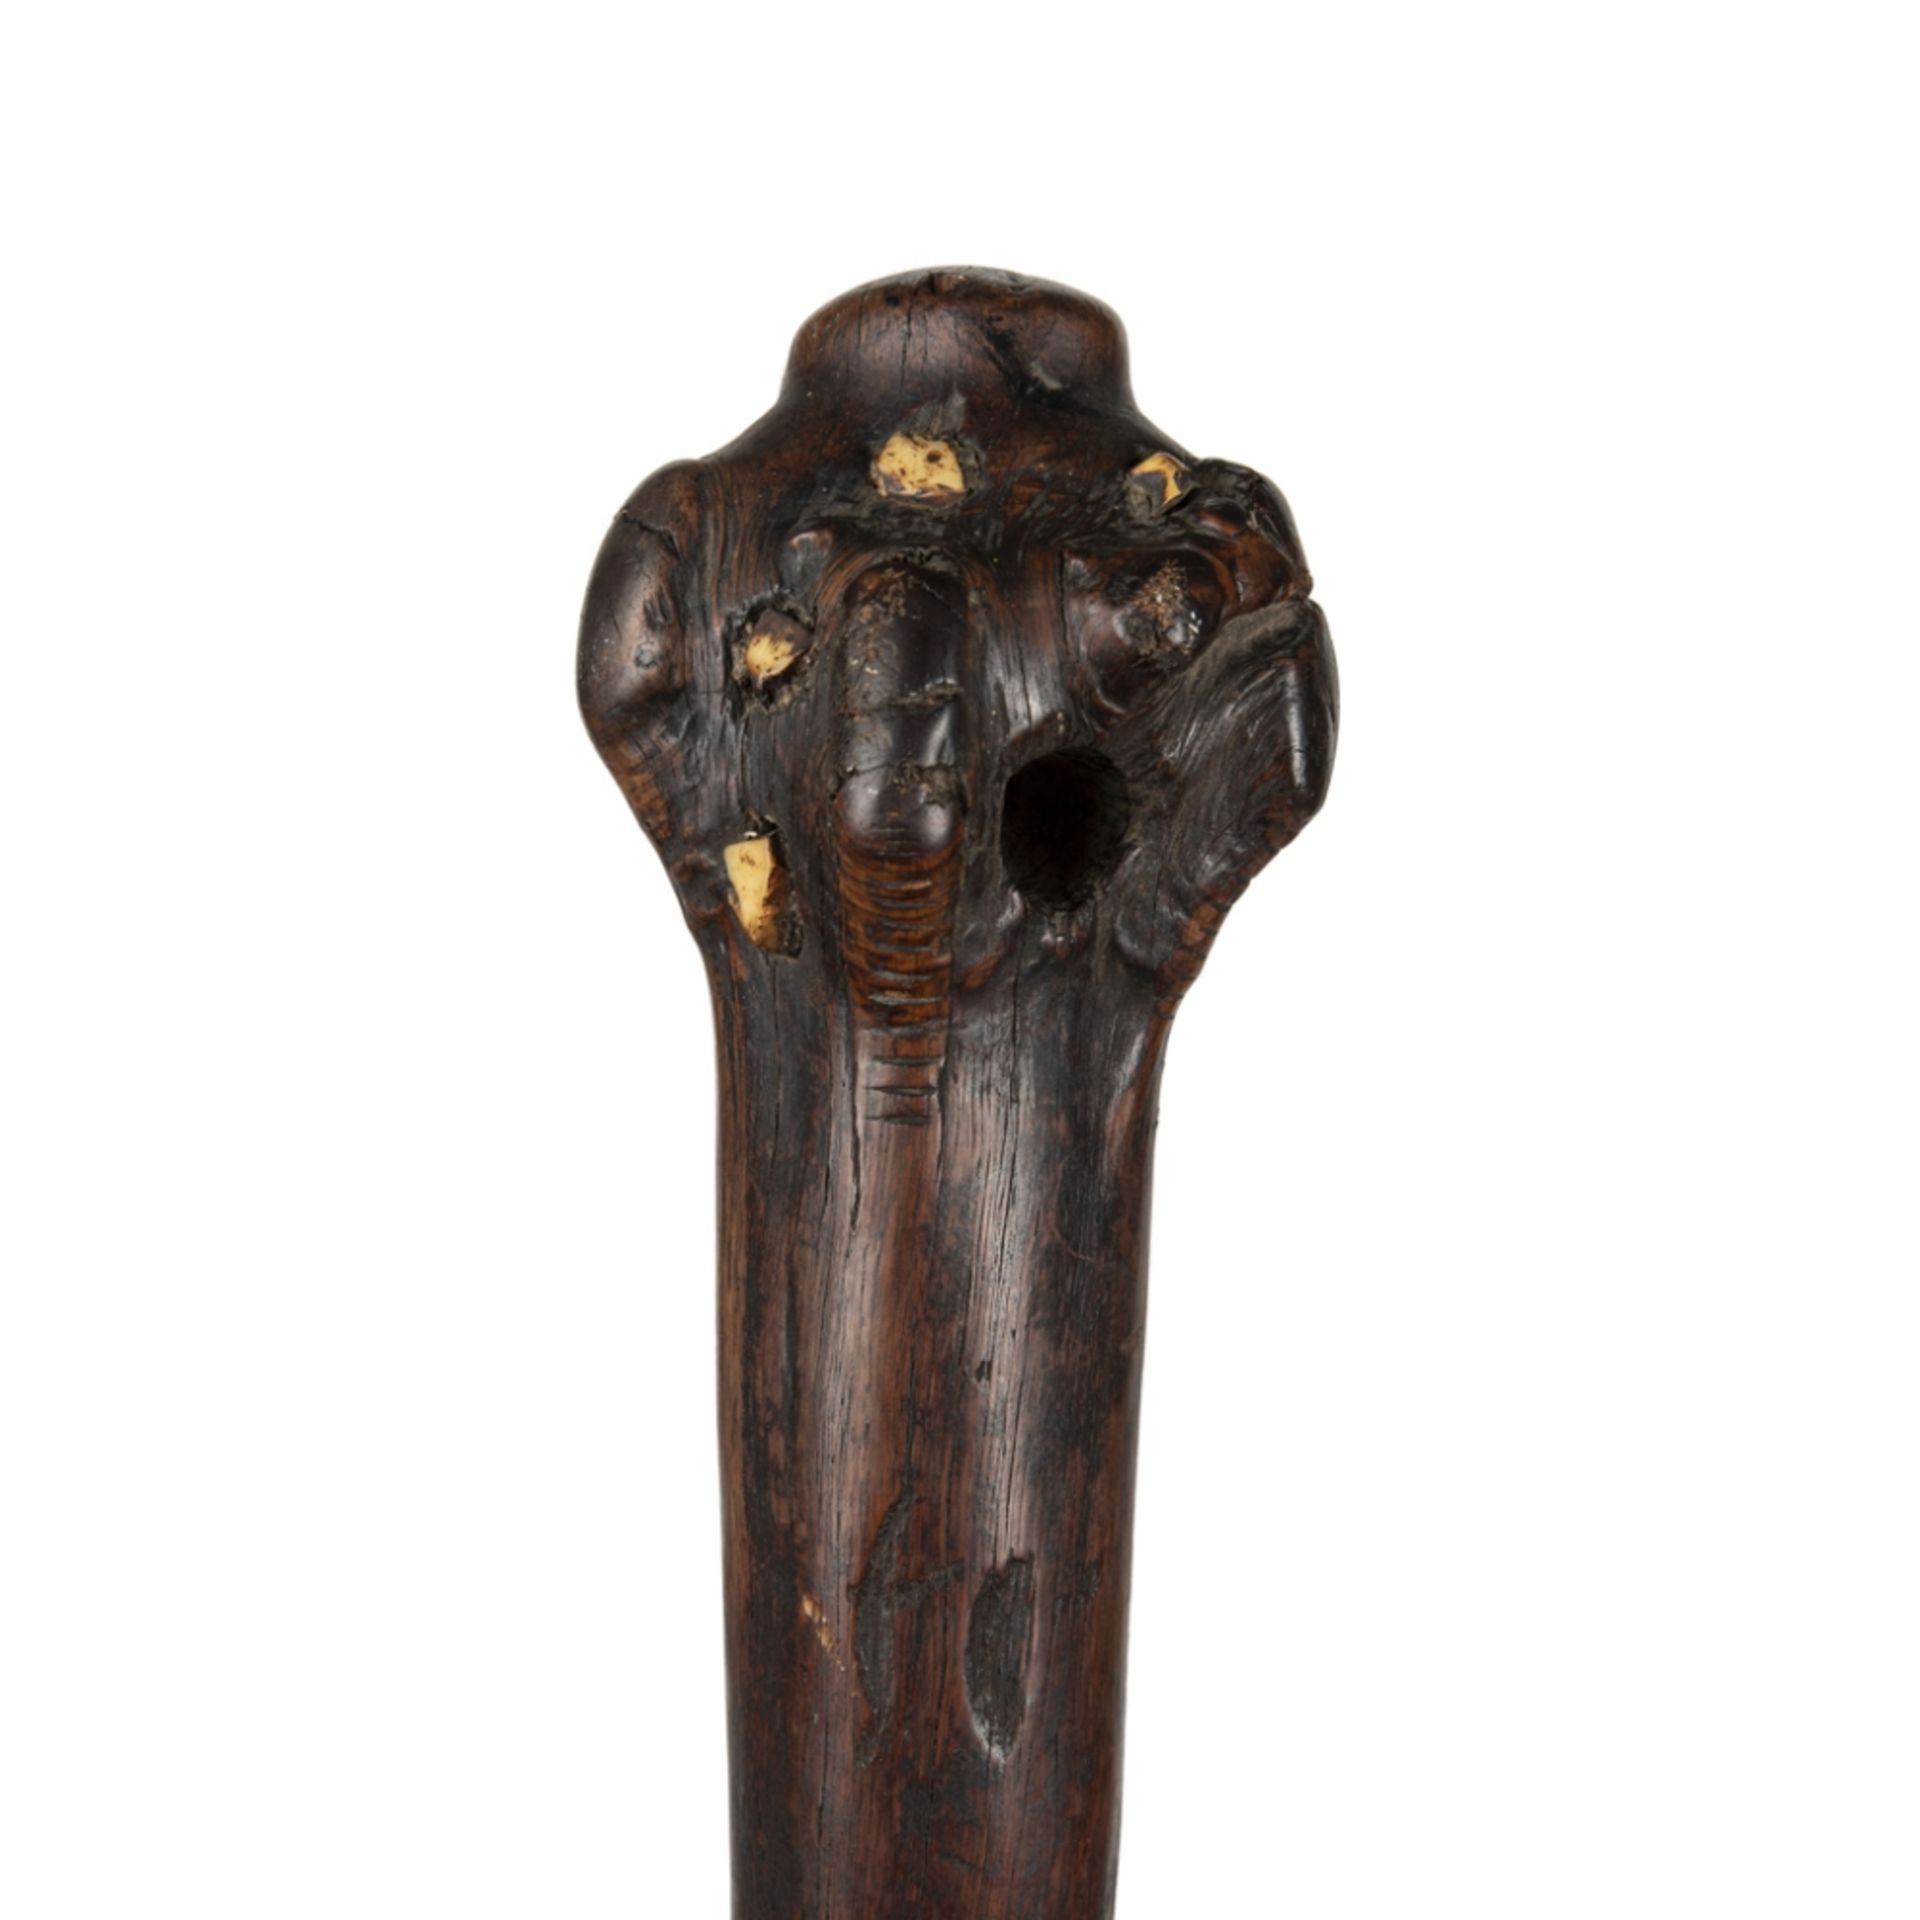 ROOTSTOCK CLUBFIJI, LATE 18TH CENTURY carved wood and marine ivory, the handle with tavatava grip, - Image 4 of 4